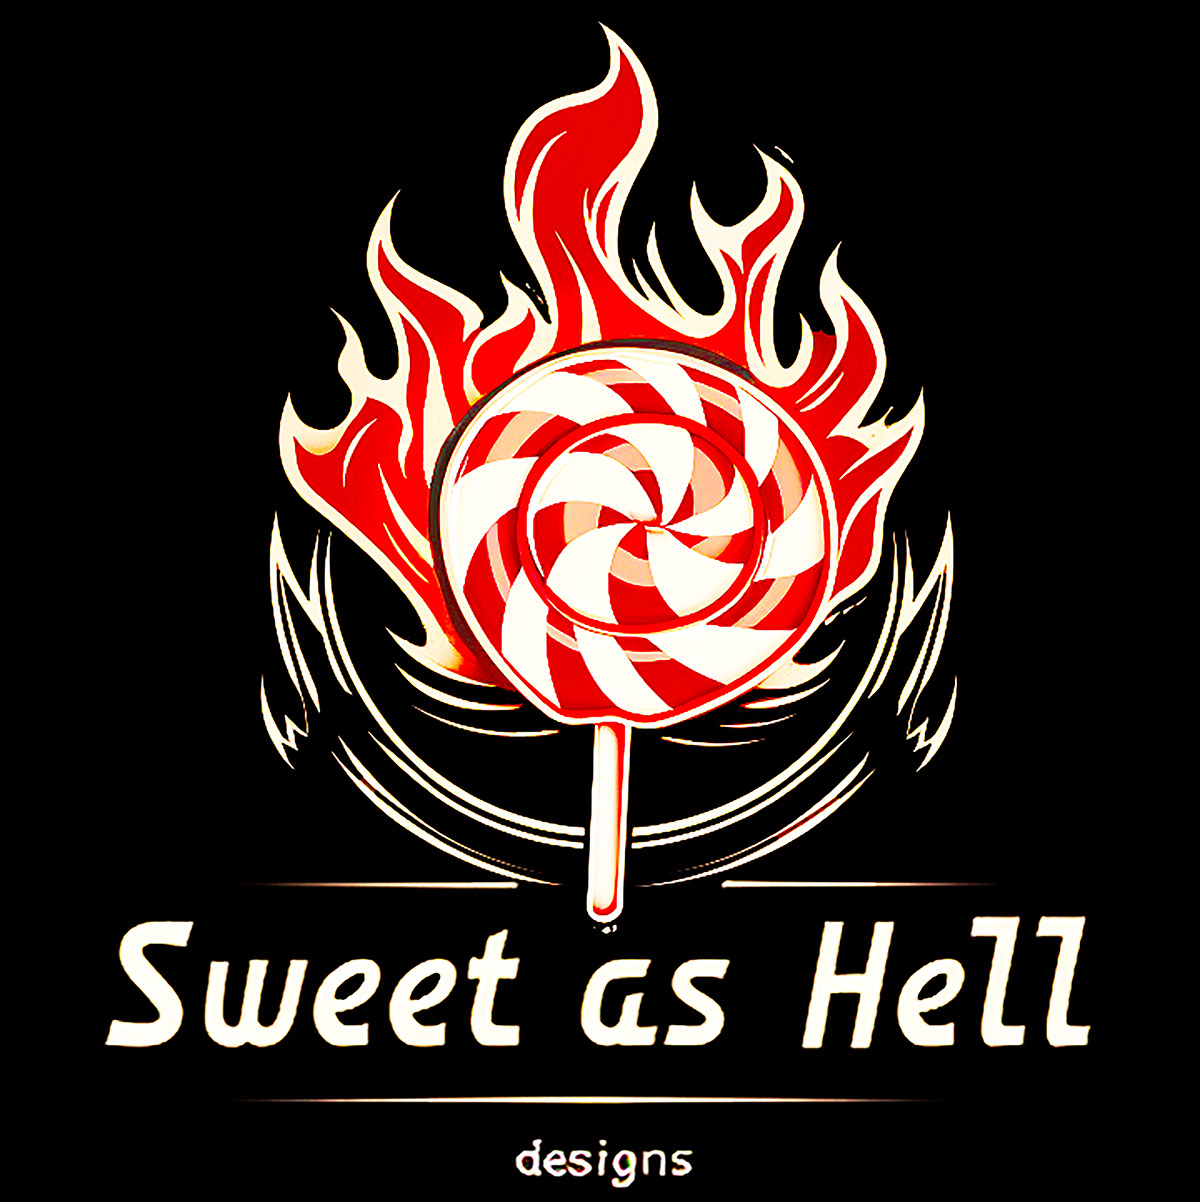 Sweet_As_Hell_Designs_Licensable_Ruffian_no_14 rendition image